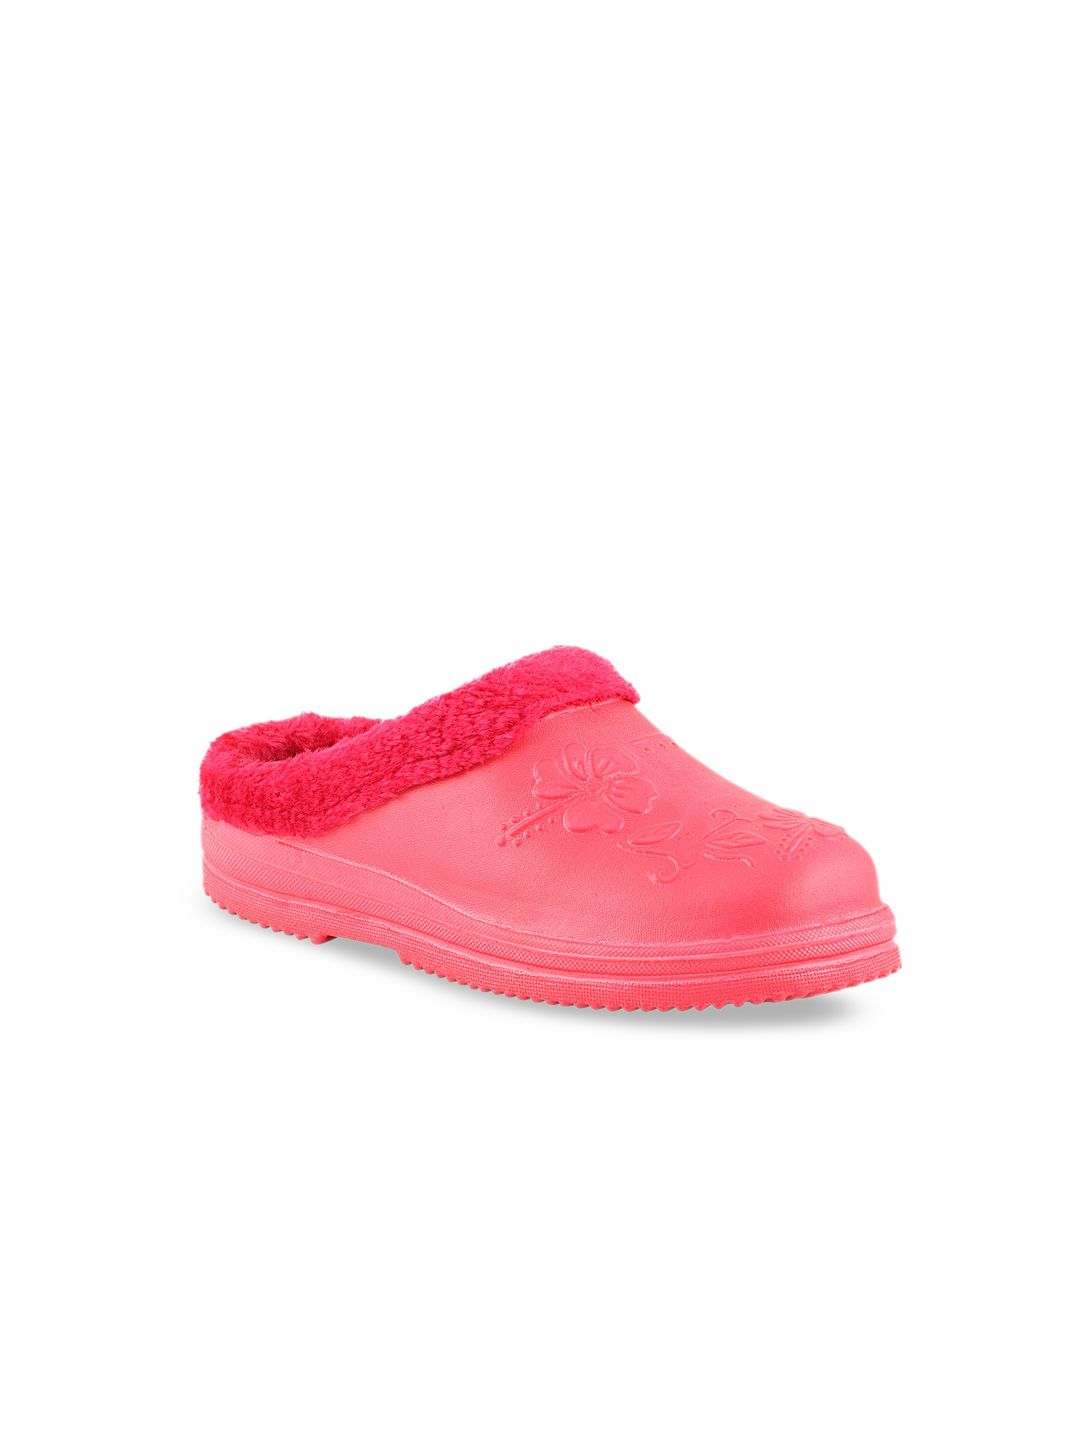 Shoetopia Women Red Suede Sneakers Price in India